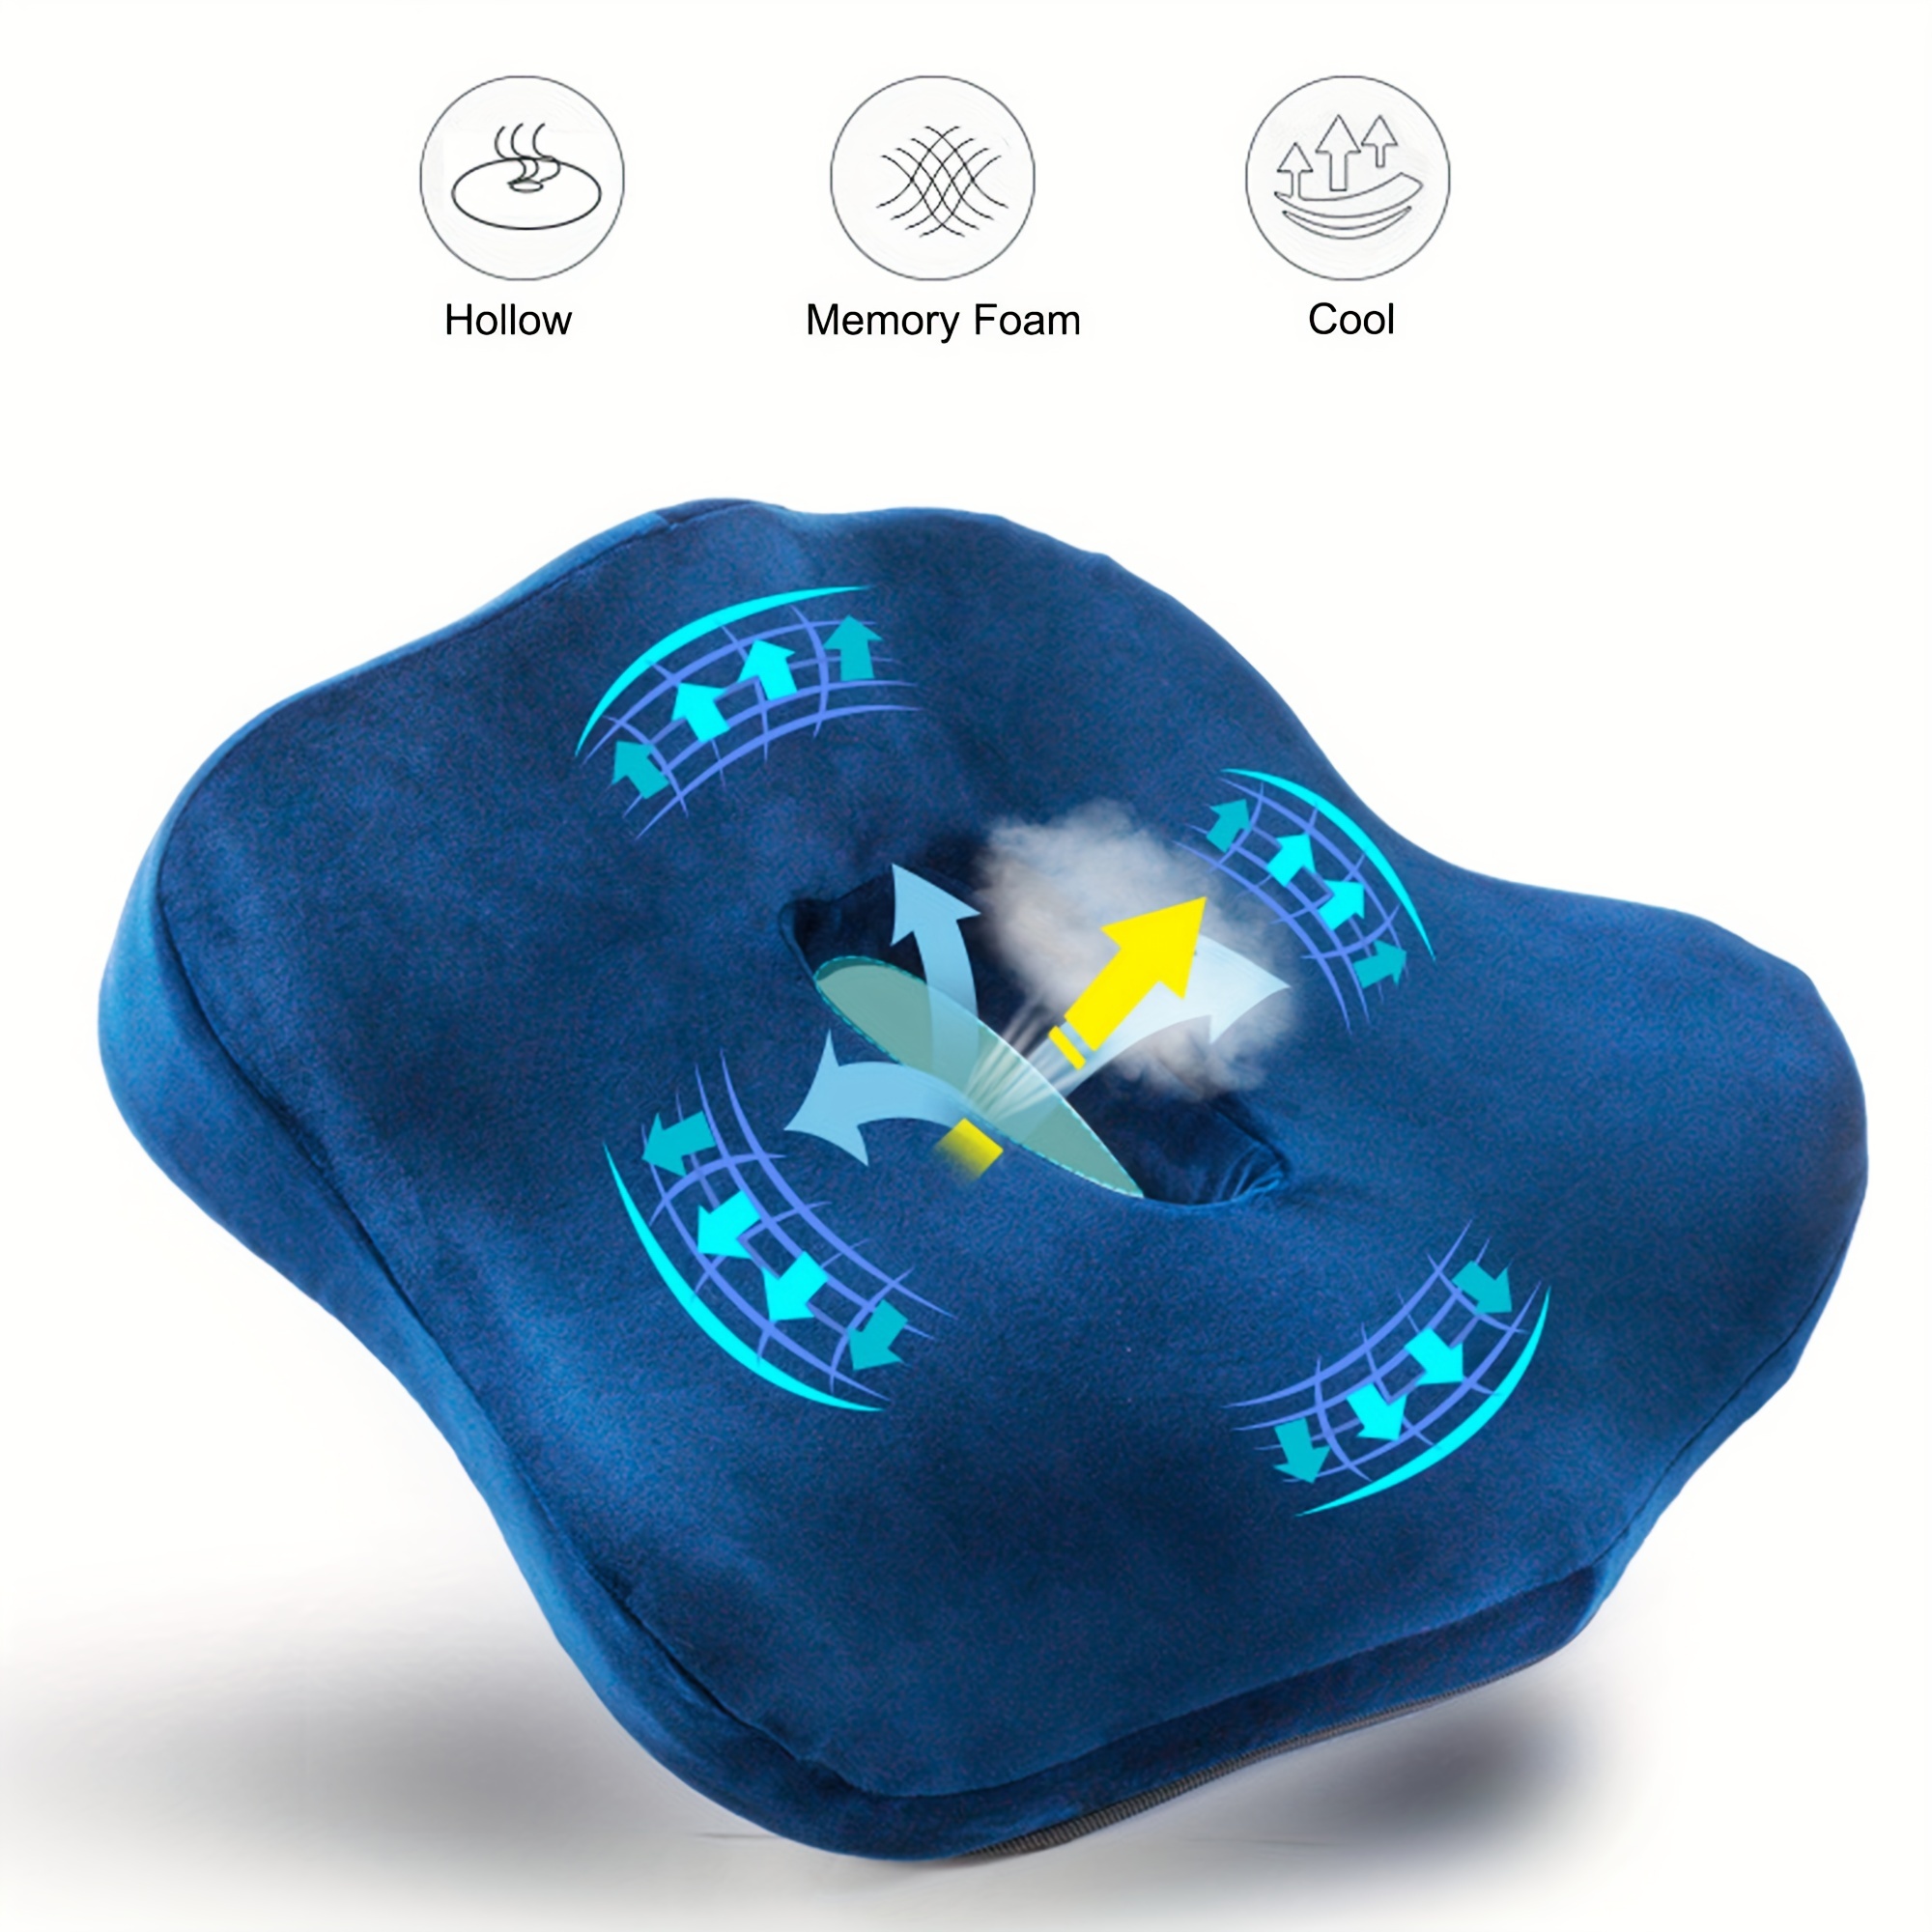 Prostate Pillow Memory Foam Seat Cushion Bed Pillows Donuts